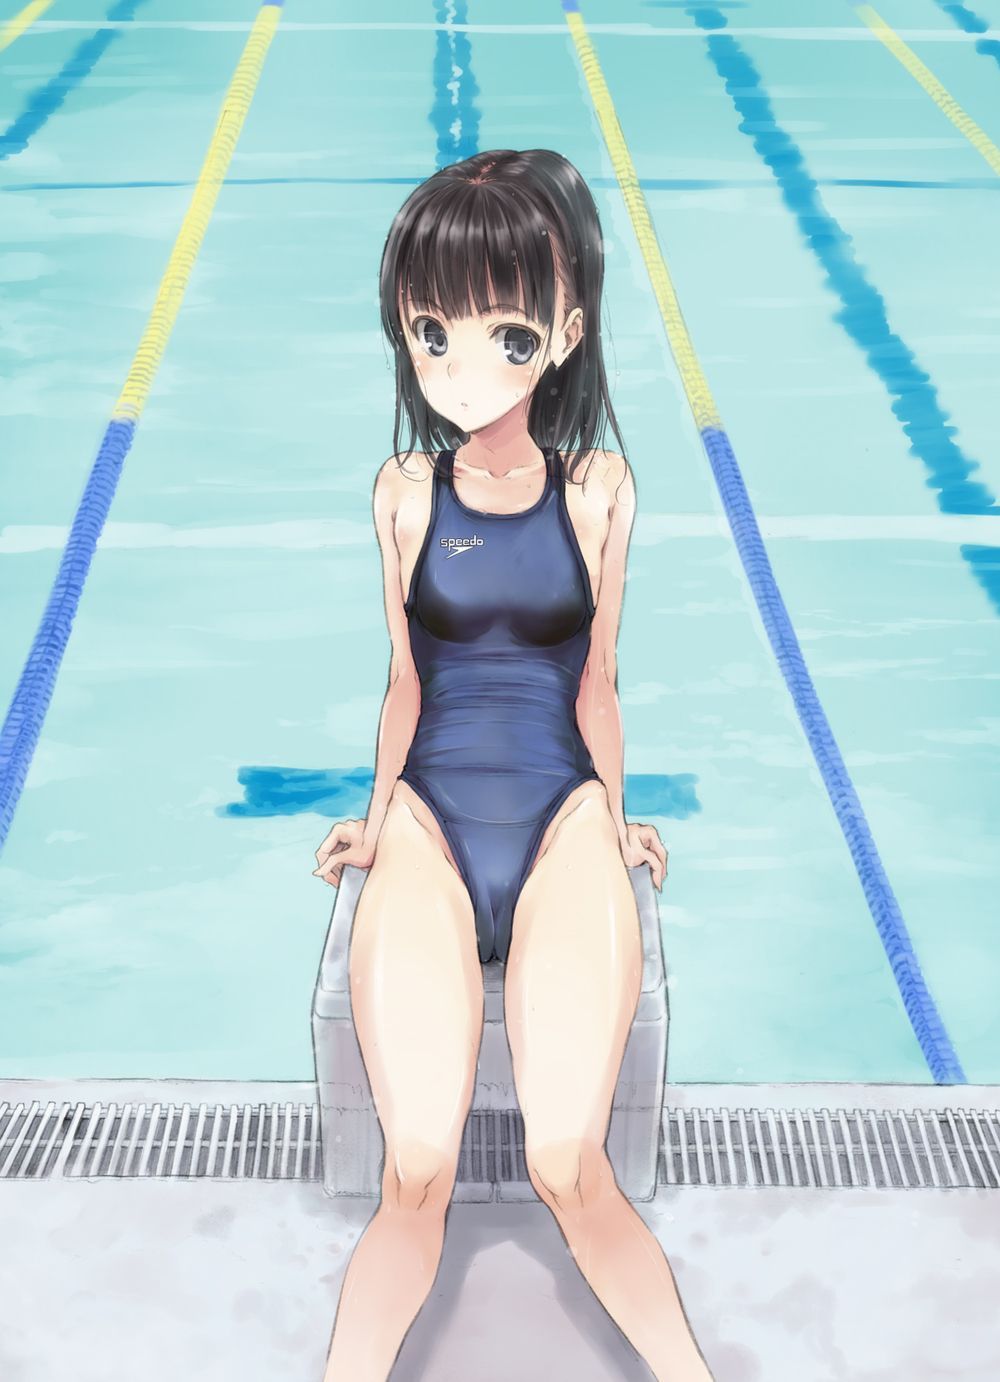 Swimsuit hentai picture General / 17